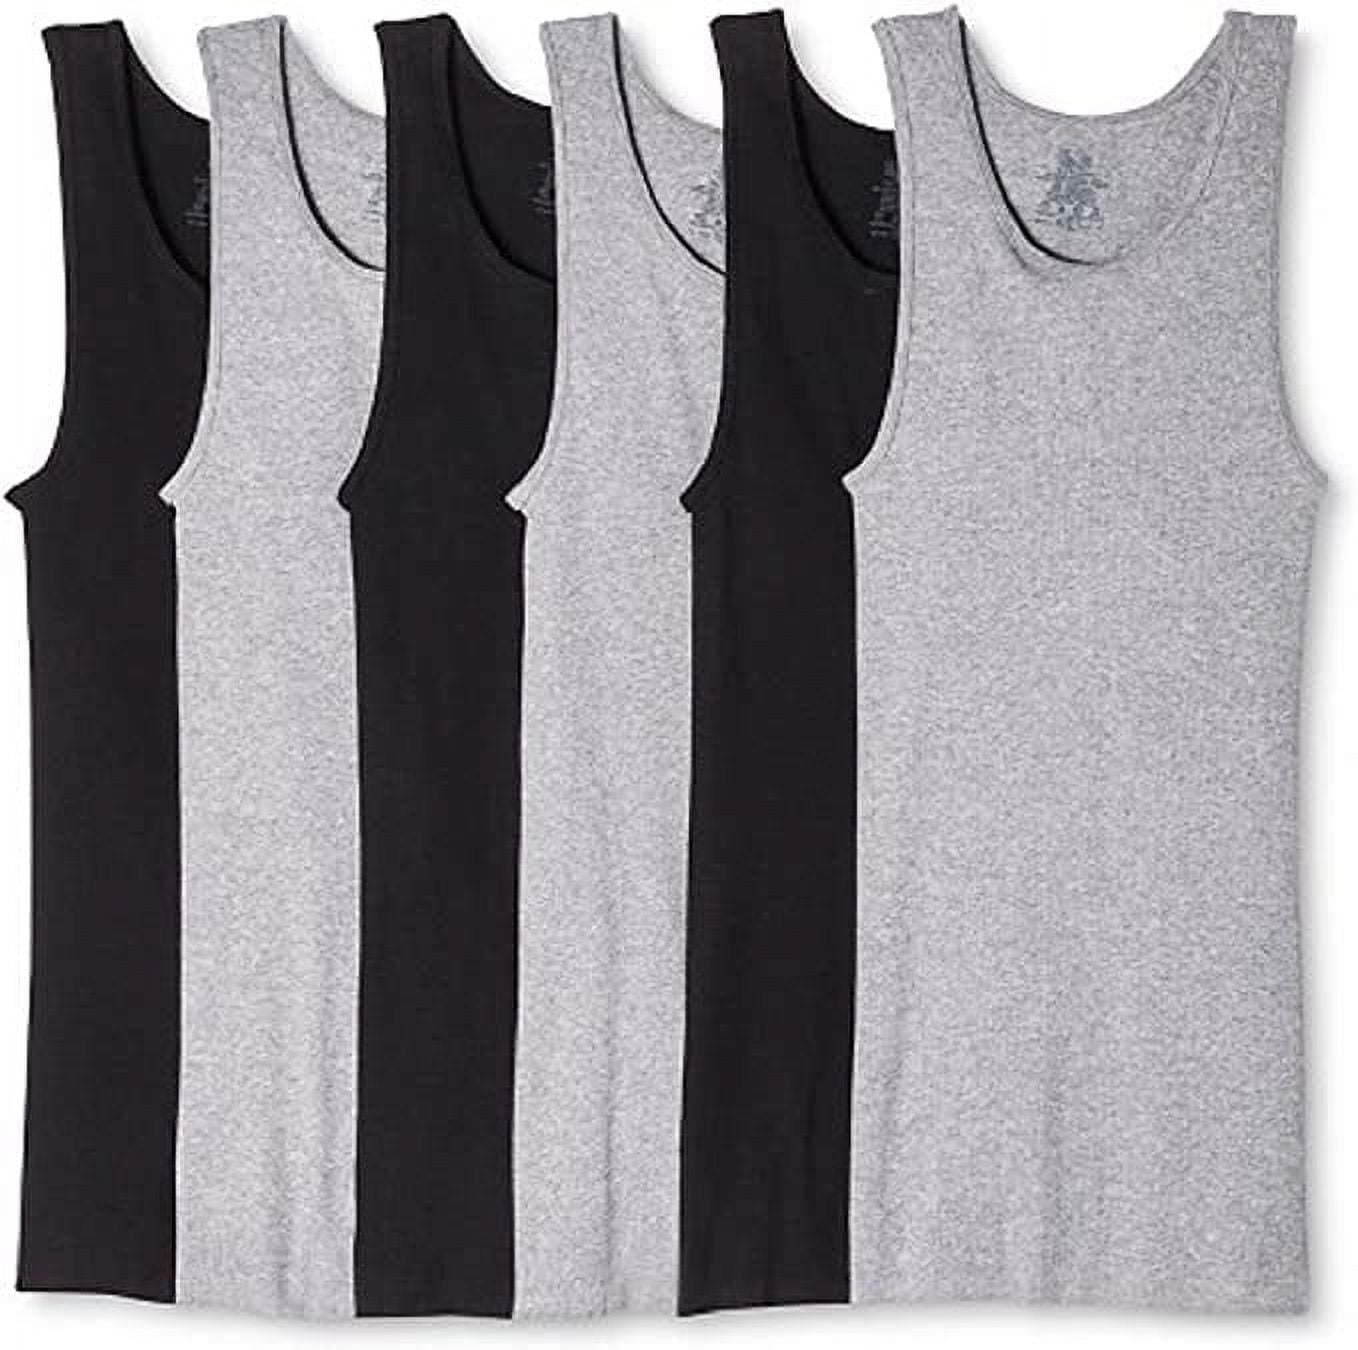  Comfneat Mens 6-Pack A-Shirts Tight Fit Tank Tops Cotton  Spandex Undershirts